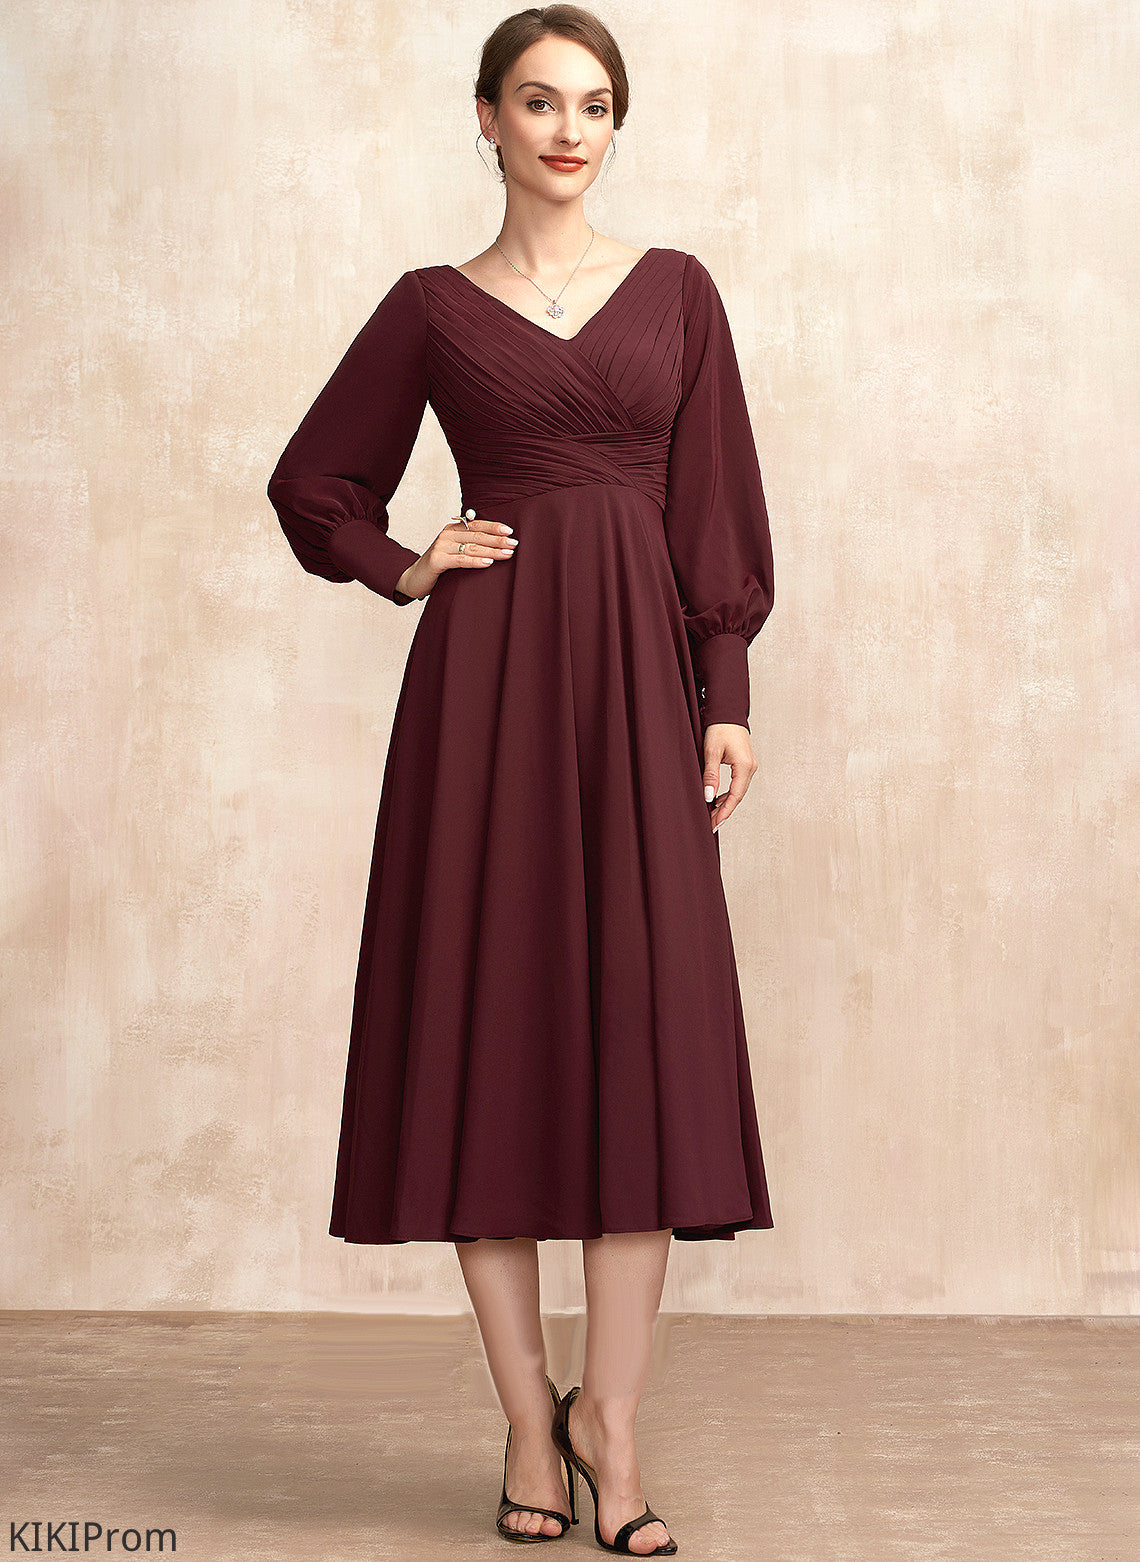 With Dress of Tea-Length Zara Ruffle Bride Mother of the Bride Dresses the V-neck Mother A-Line